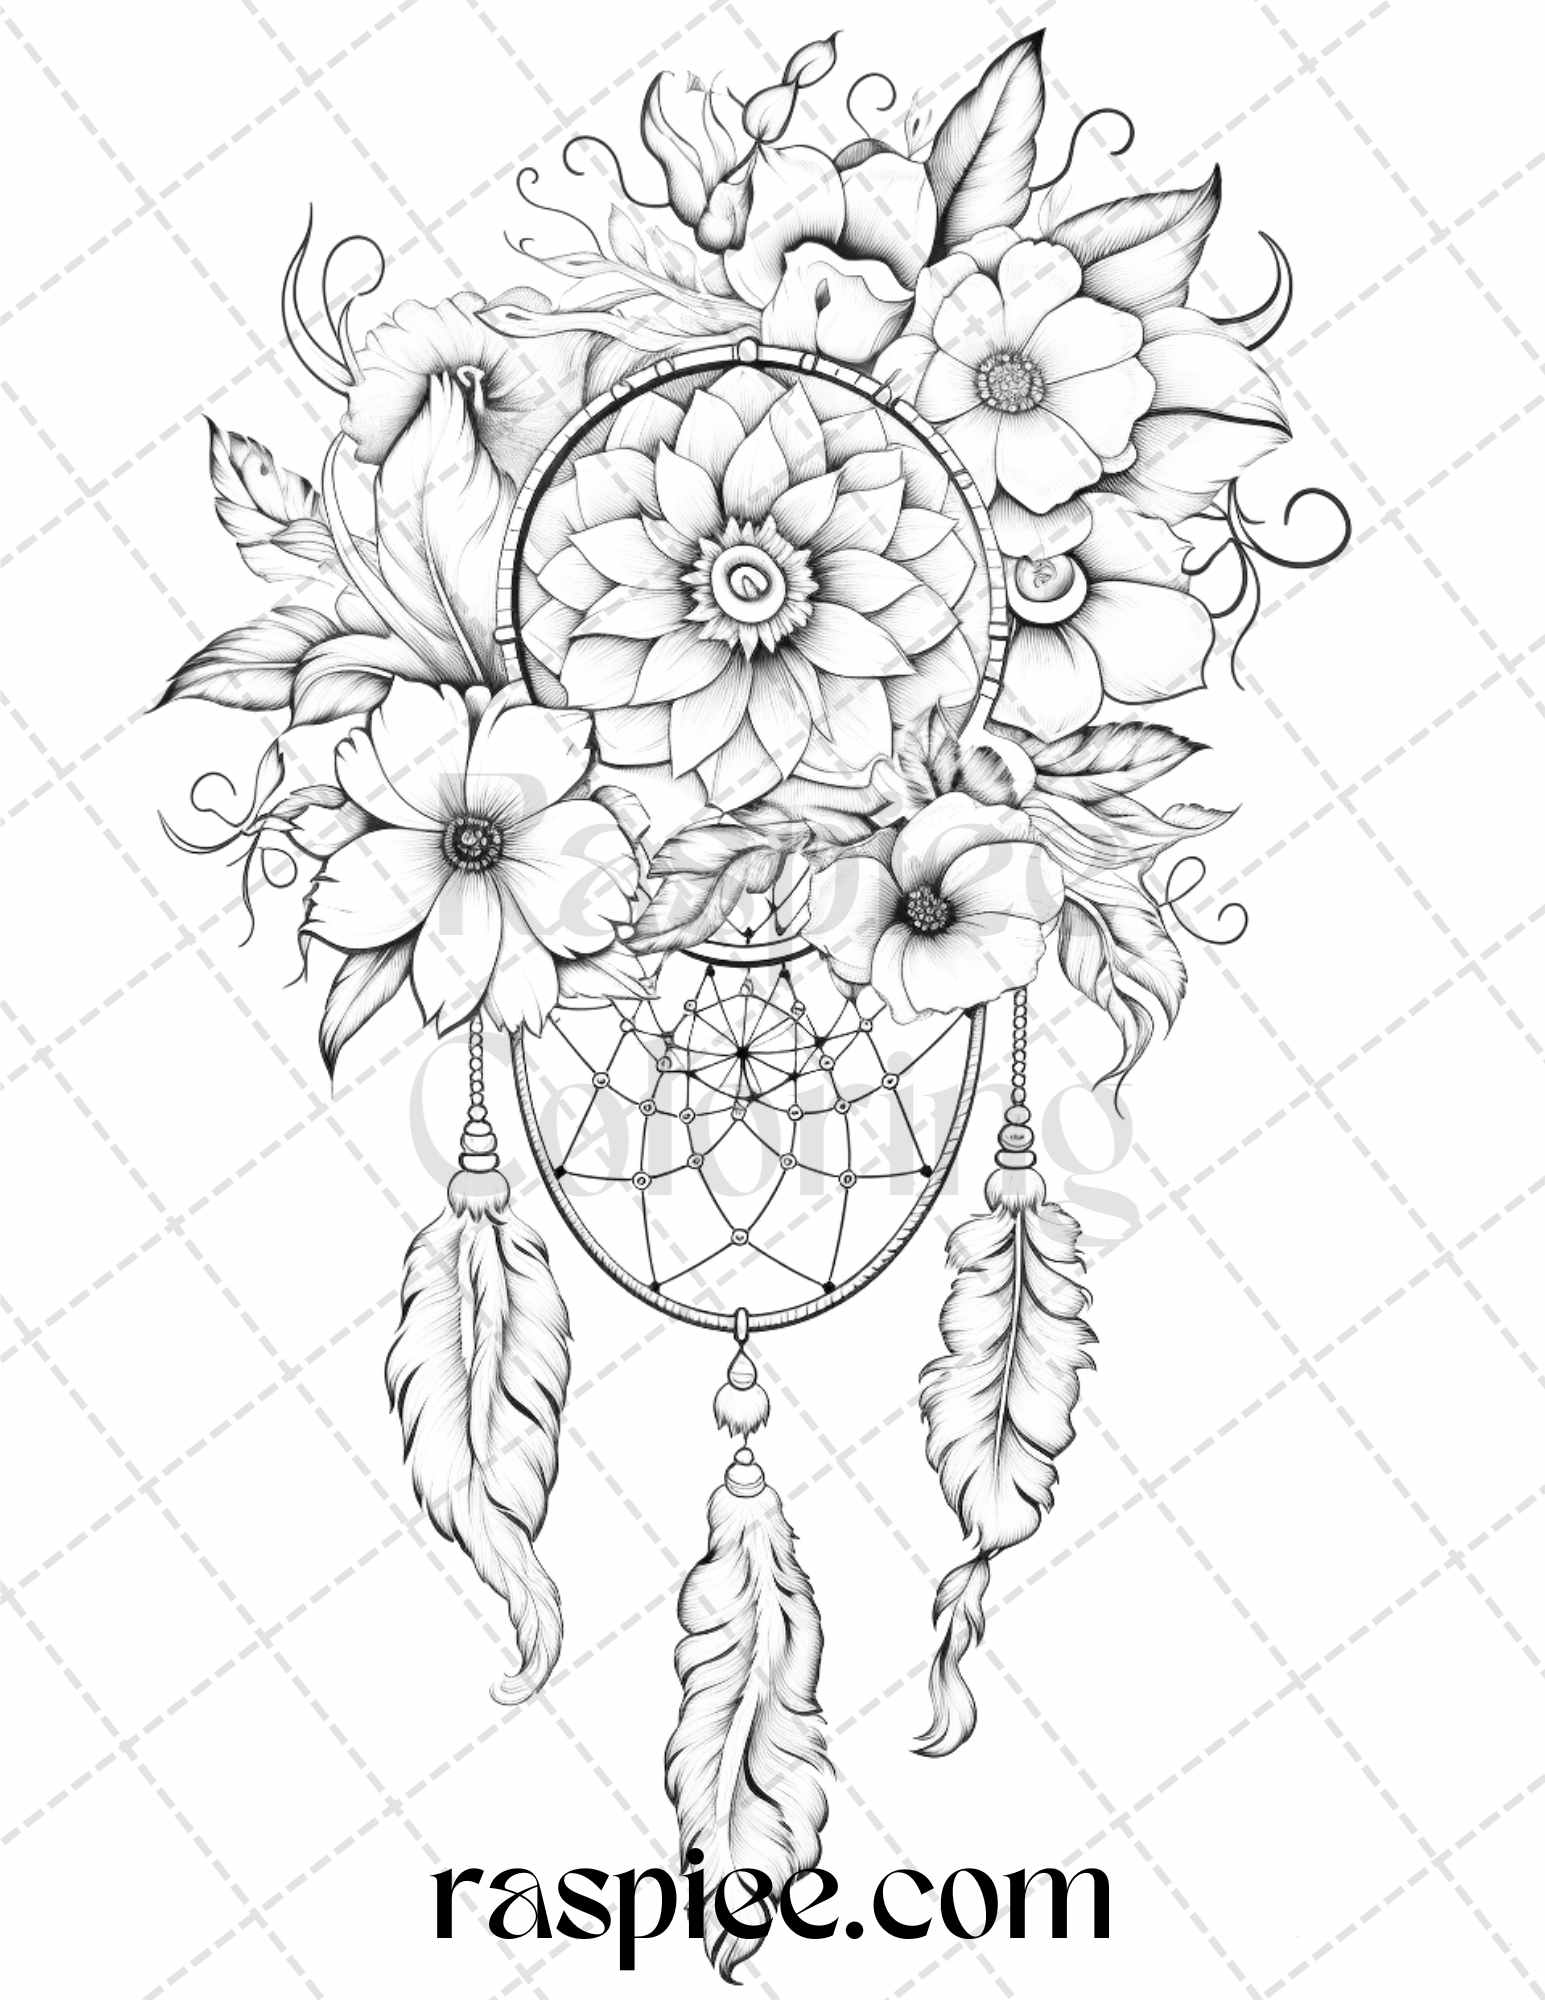 Flower dreamcatcher grayscale coloring pages printable for adults â coloring